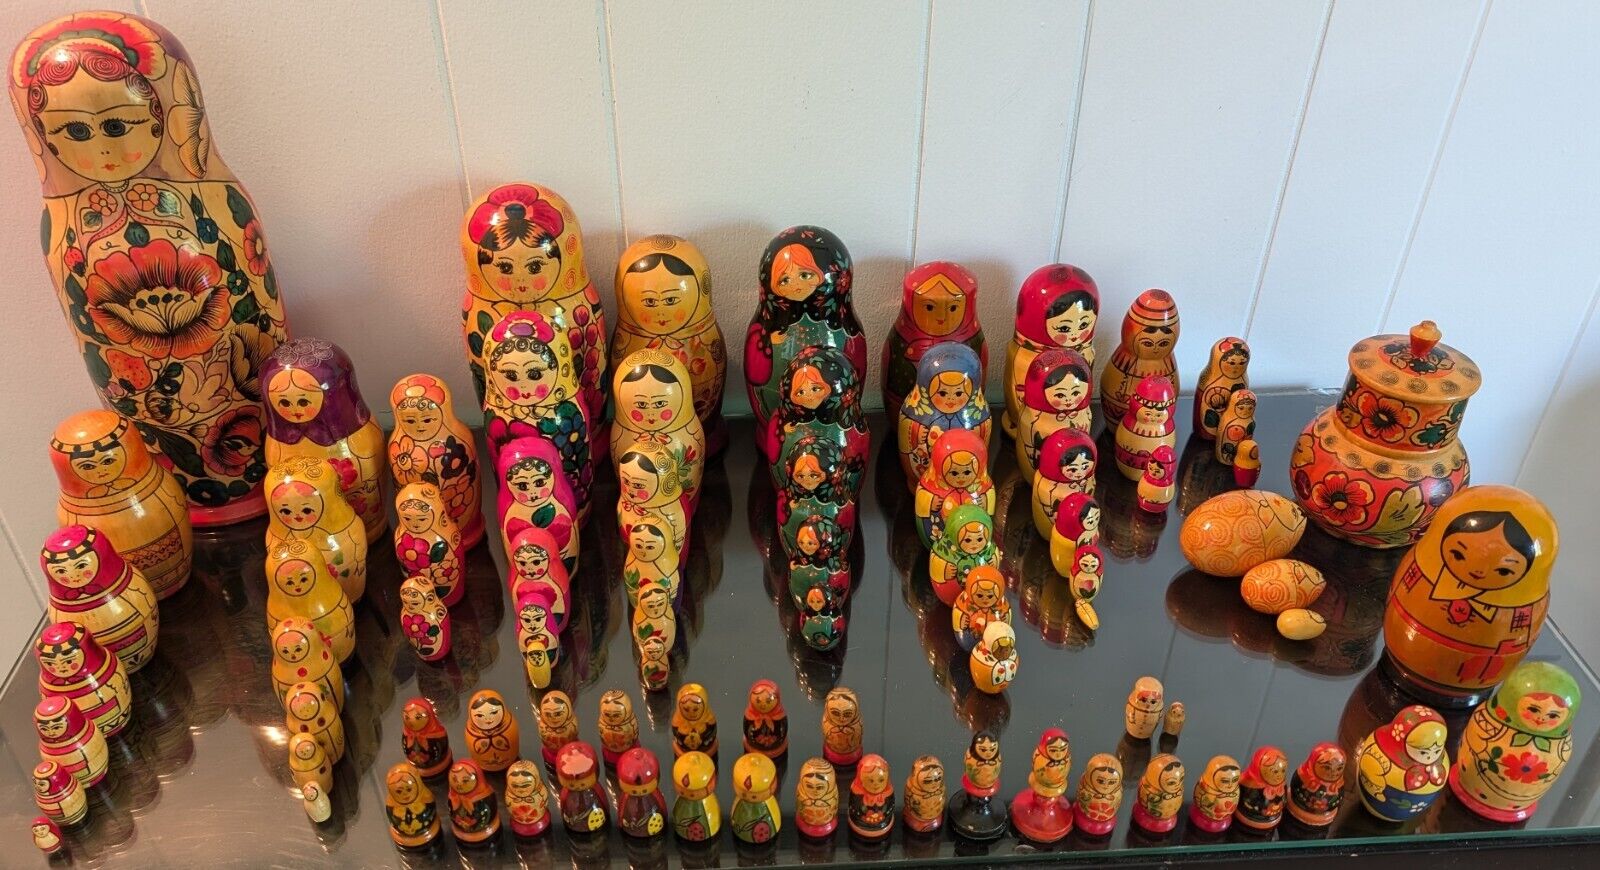 ENTIRE COLLECTION OF VINTAGE RUSSIAN MATRYOSHKA NESTING DOLLS - 85 Pieces RARE